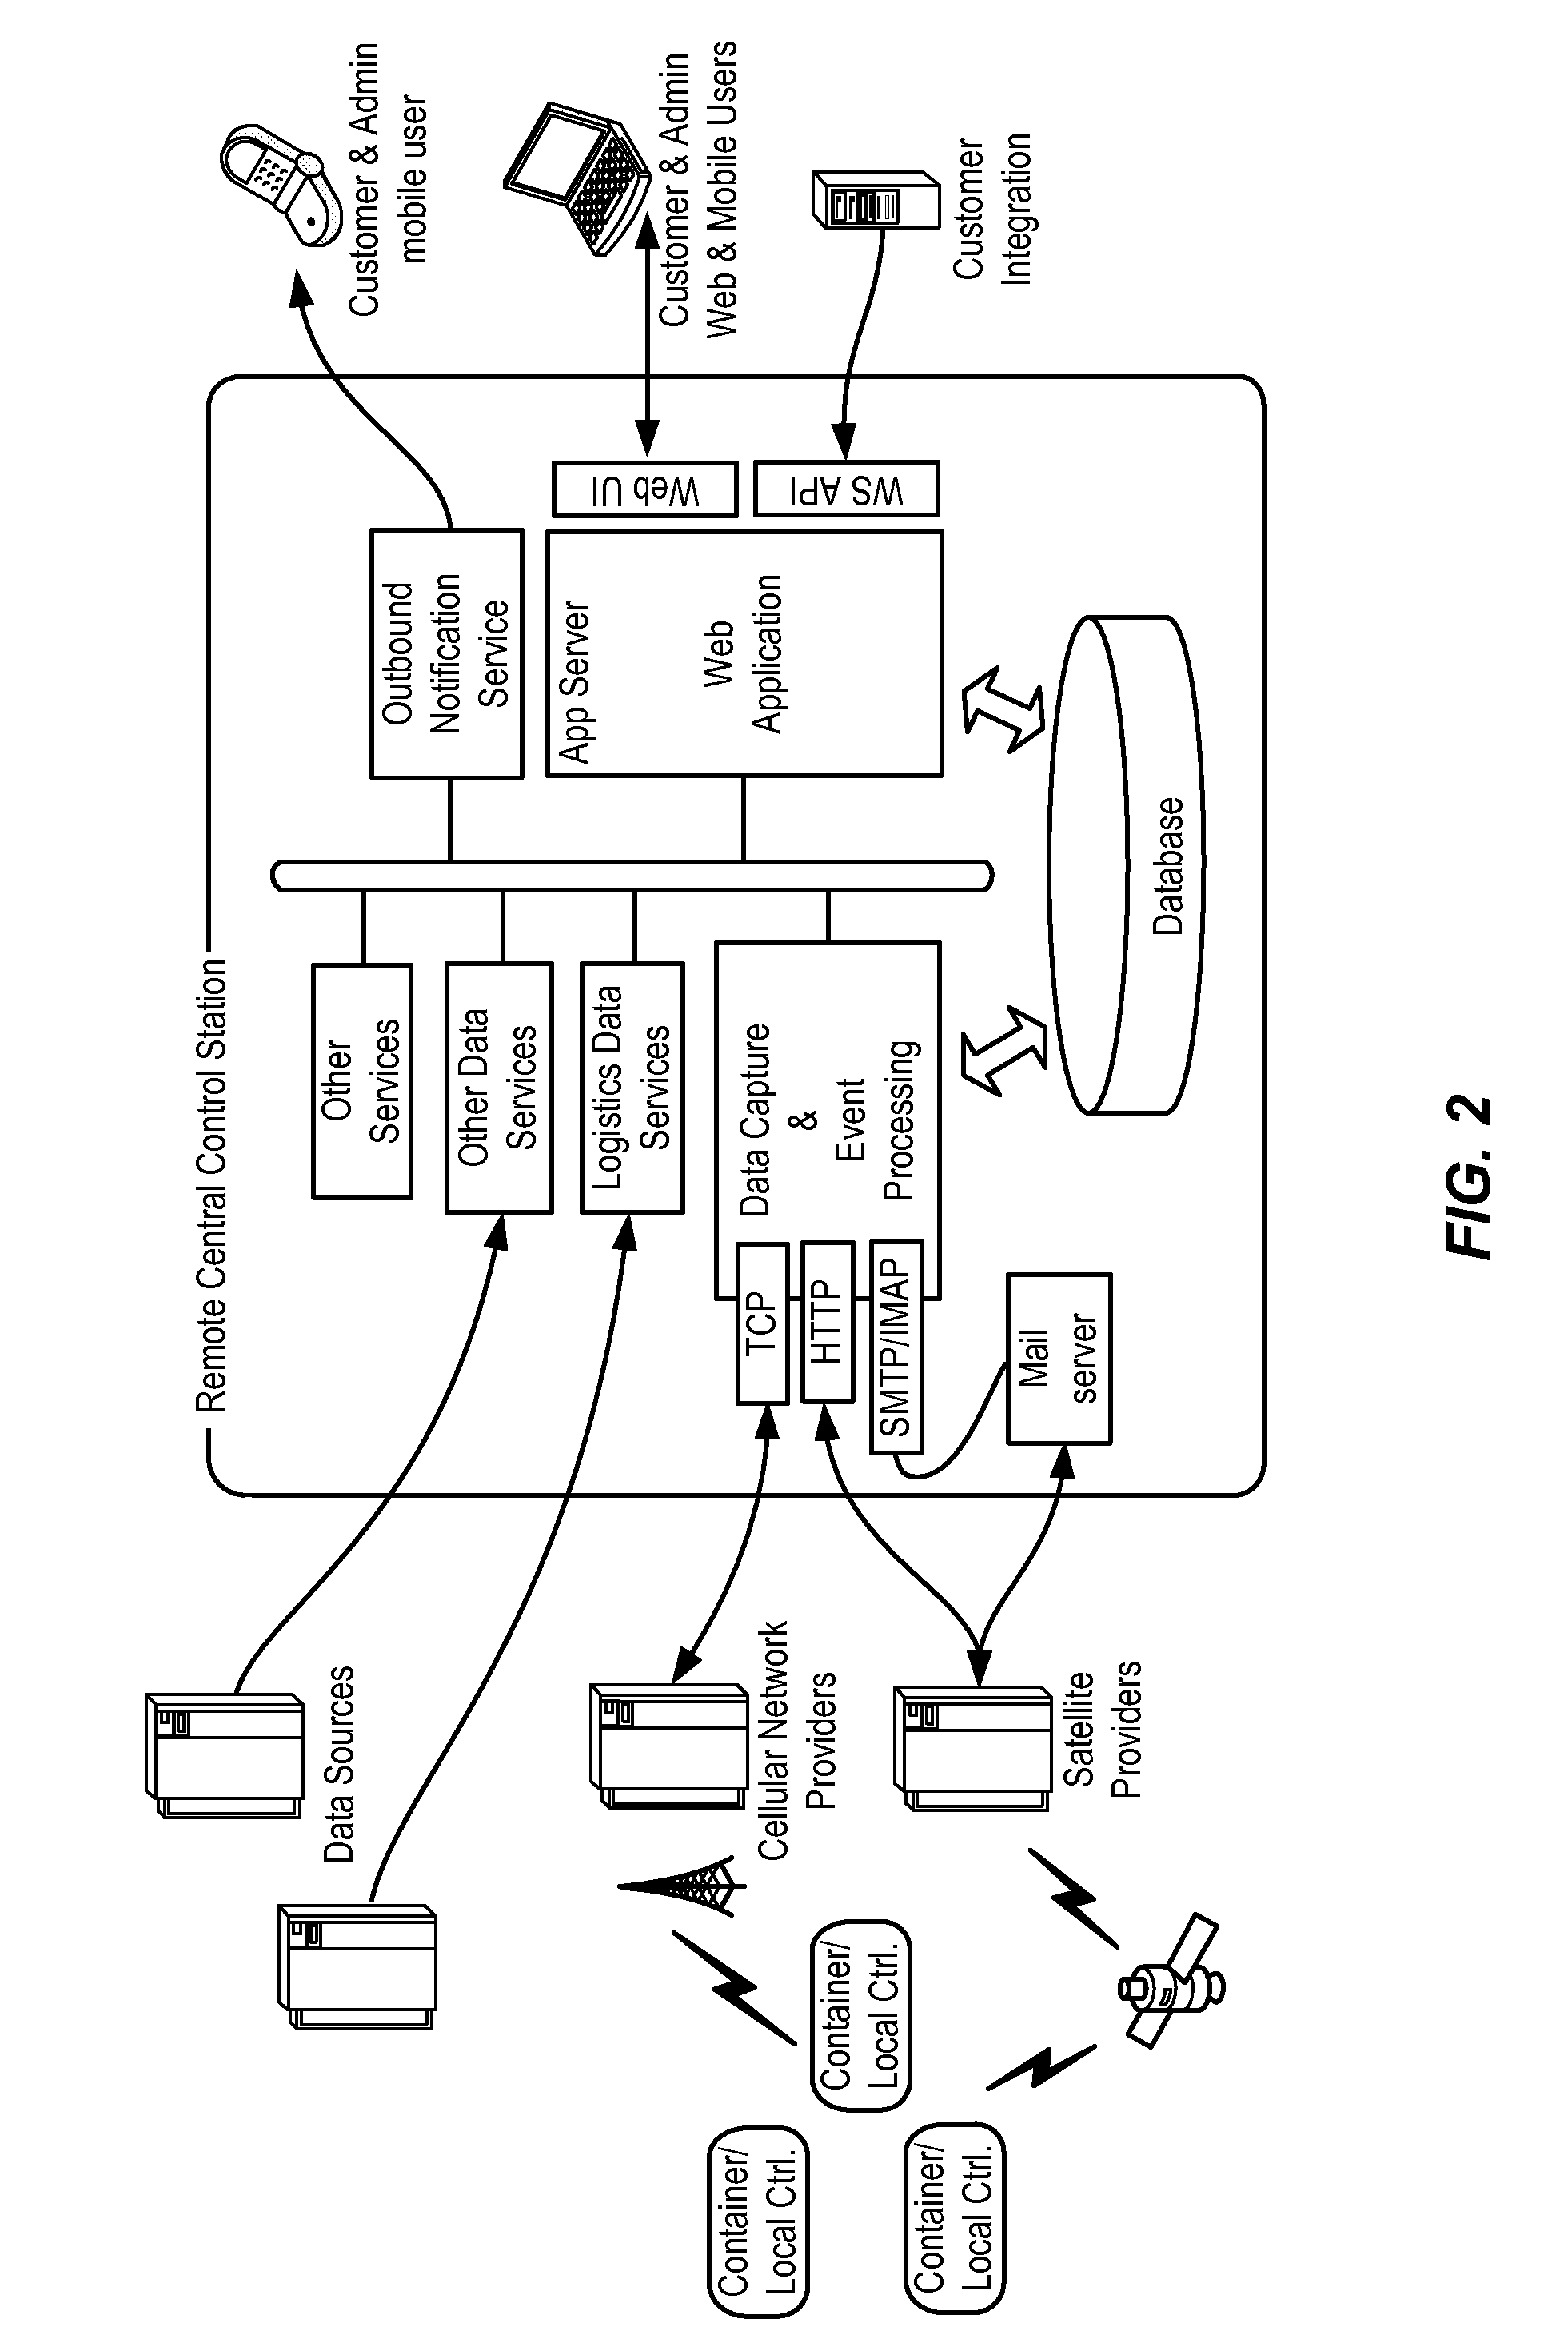 Methods and systems for controlled distribution of perishable goods